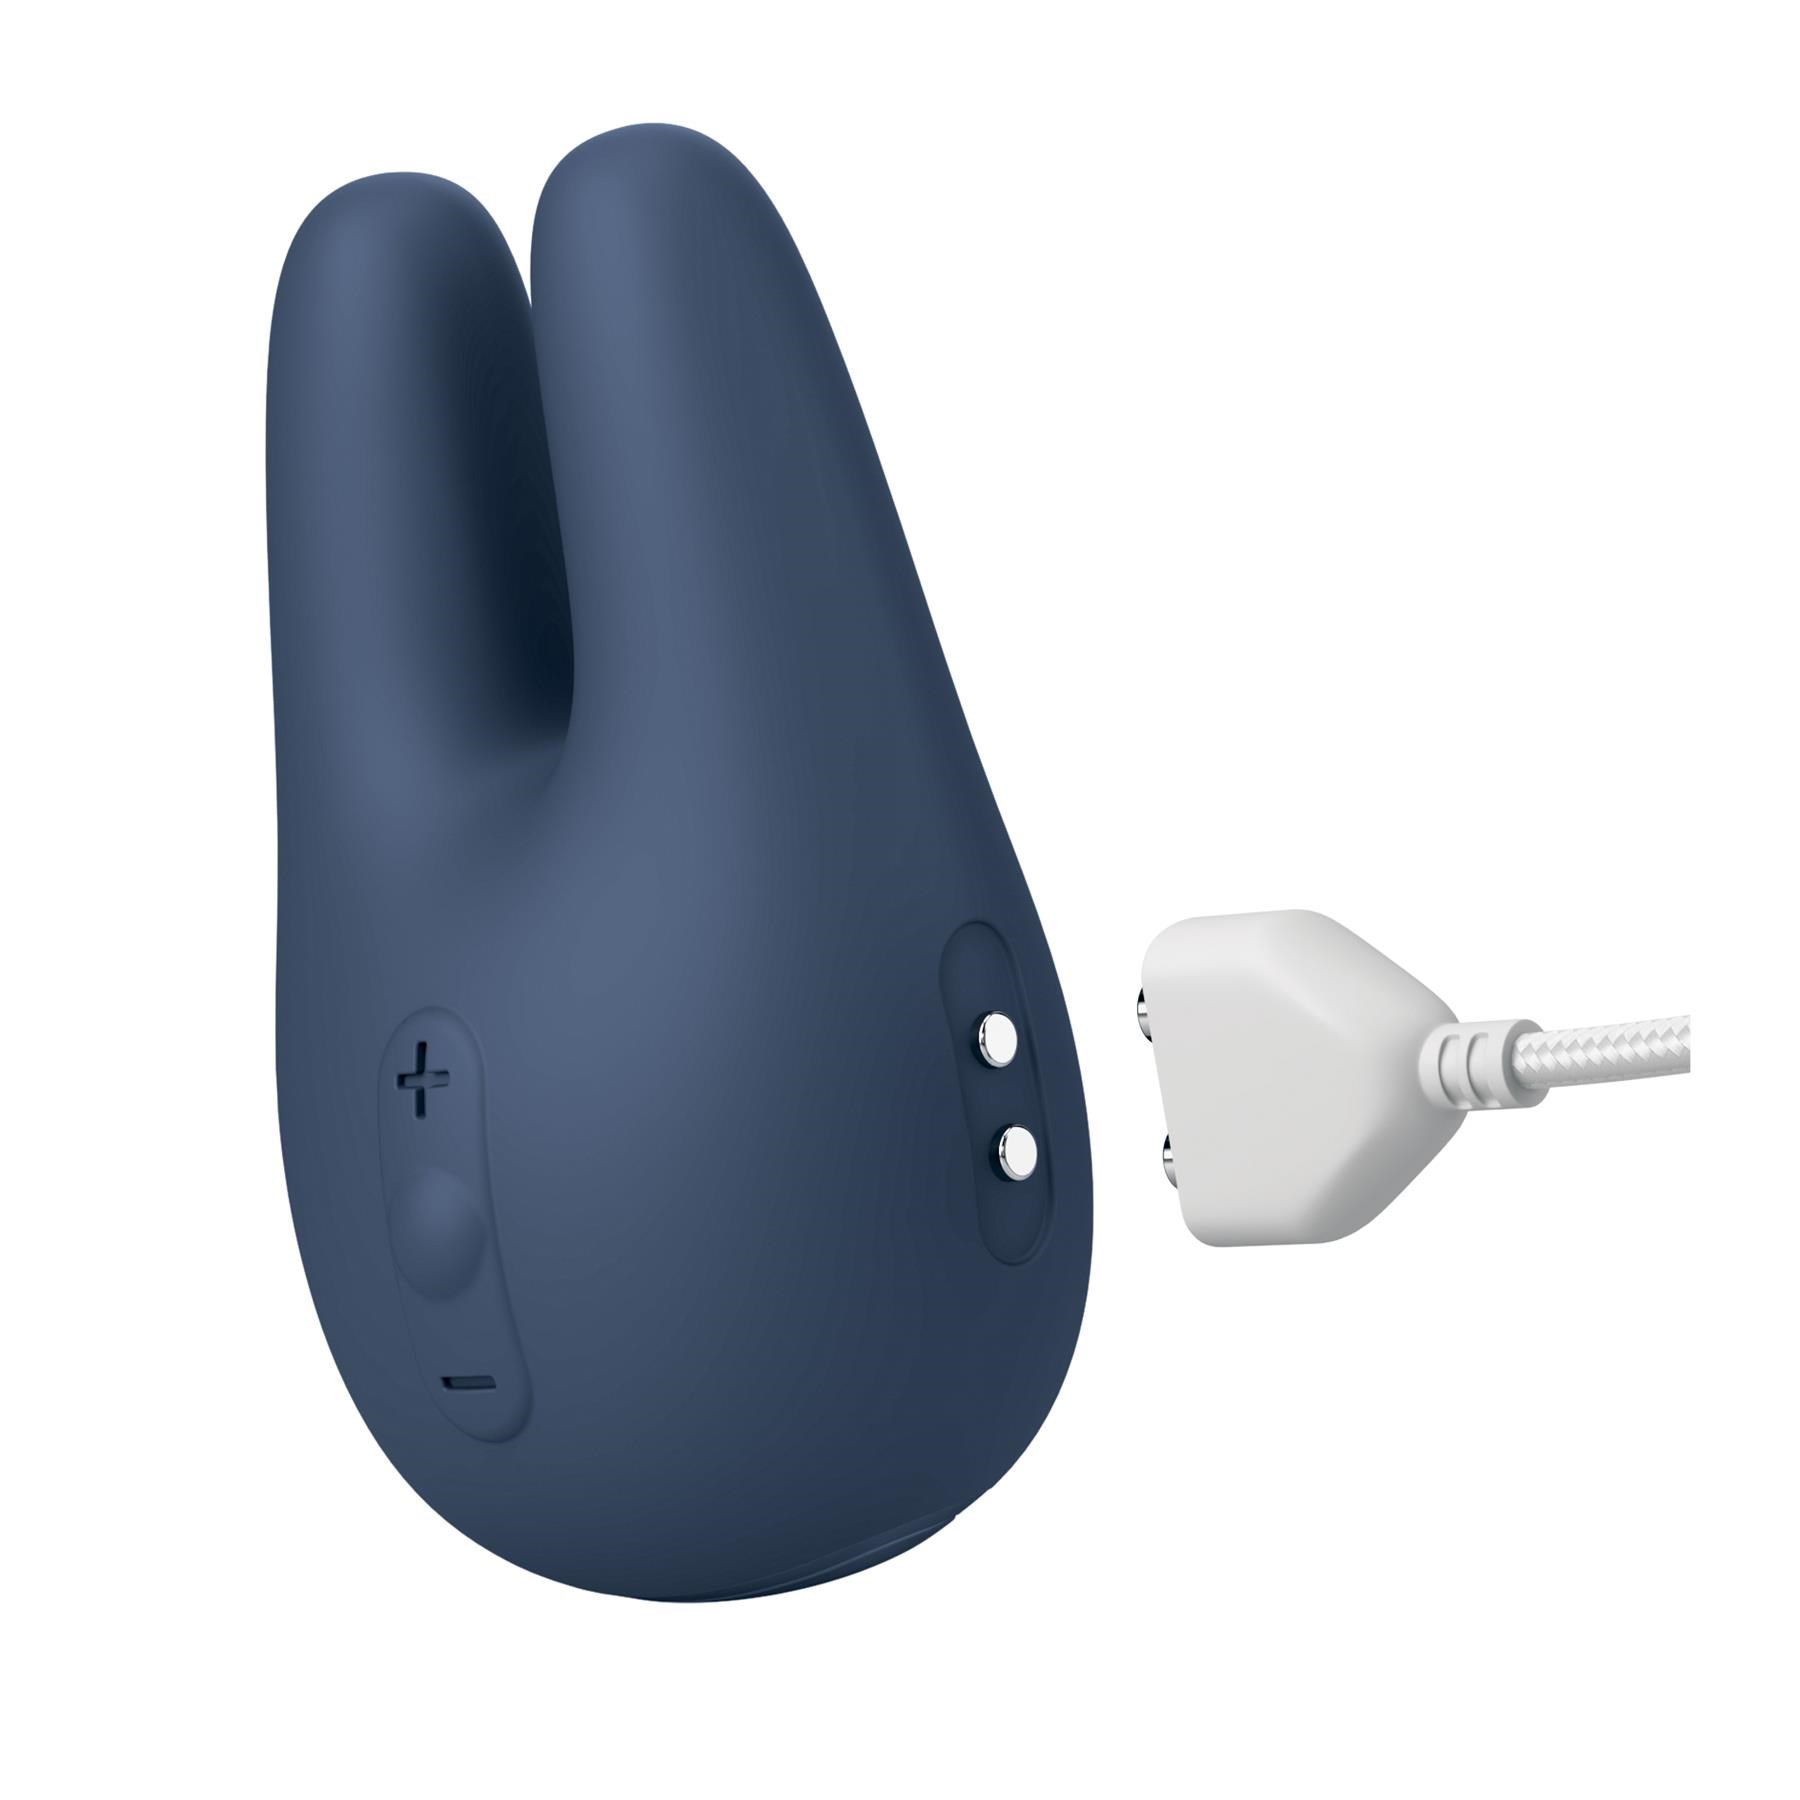 Jimmy Jane Form 2 Pro Vibrator - Showing Where Charging Cable is Placed